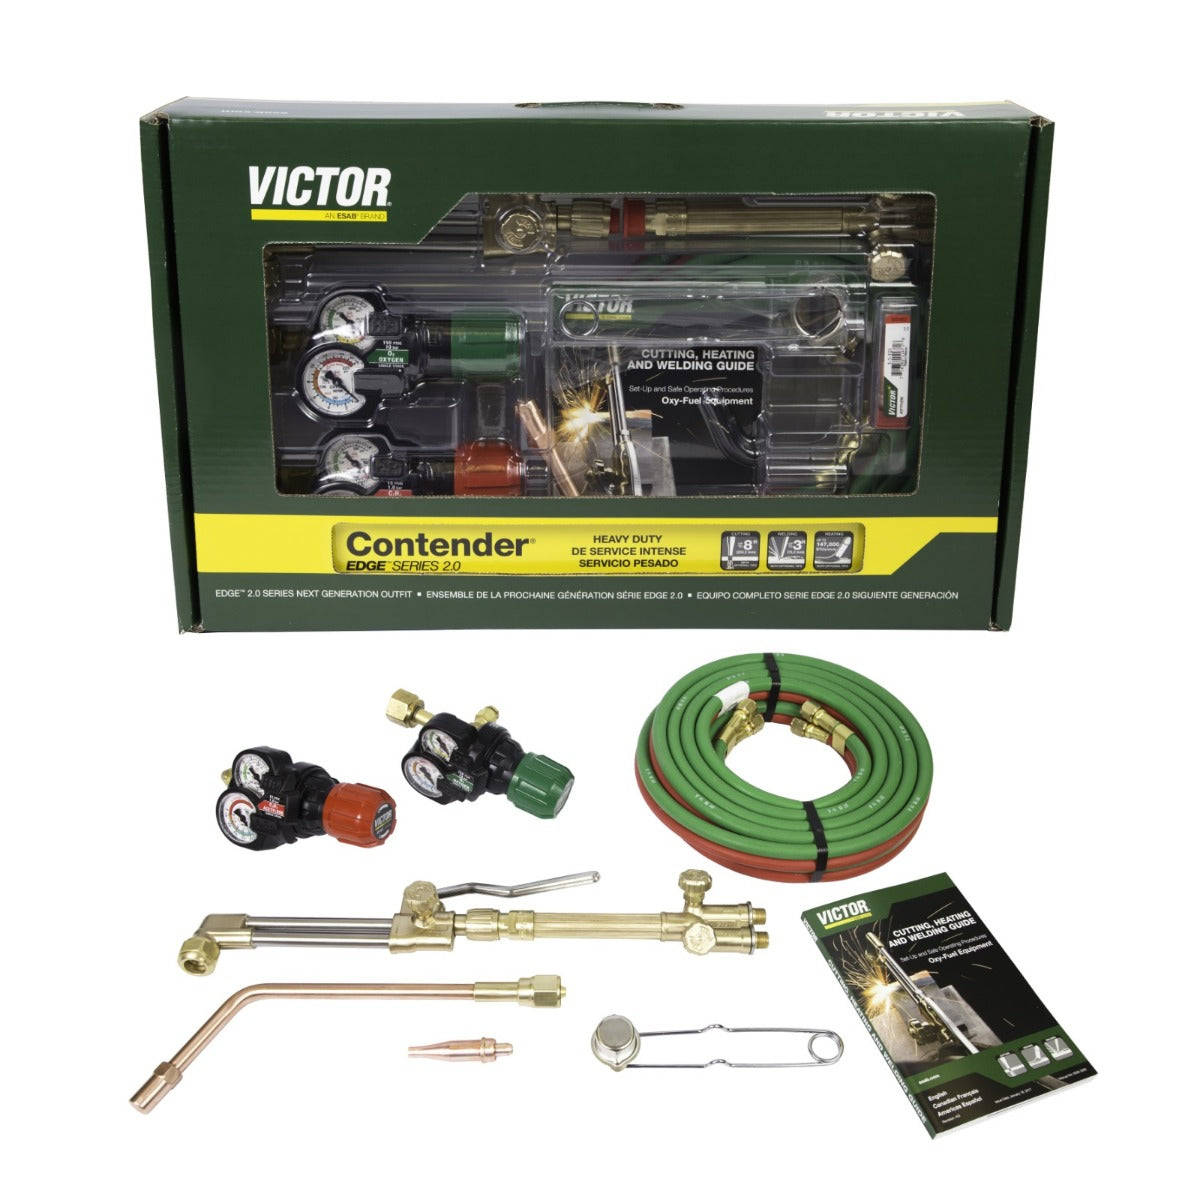 Victor Contender 2.0 Heavy Duty Welding and Cutting Outfit (0384-2131)